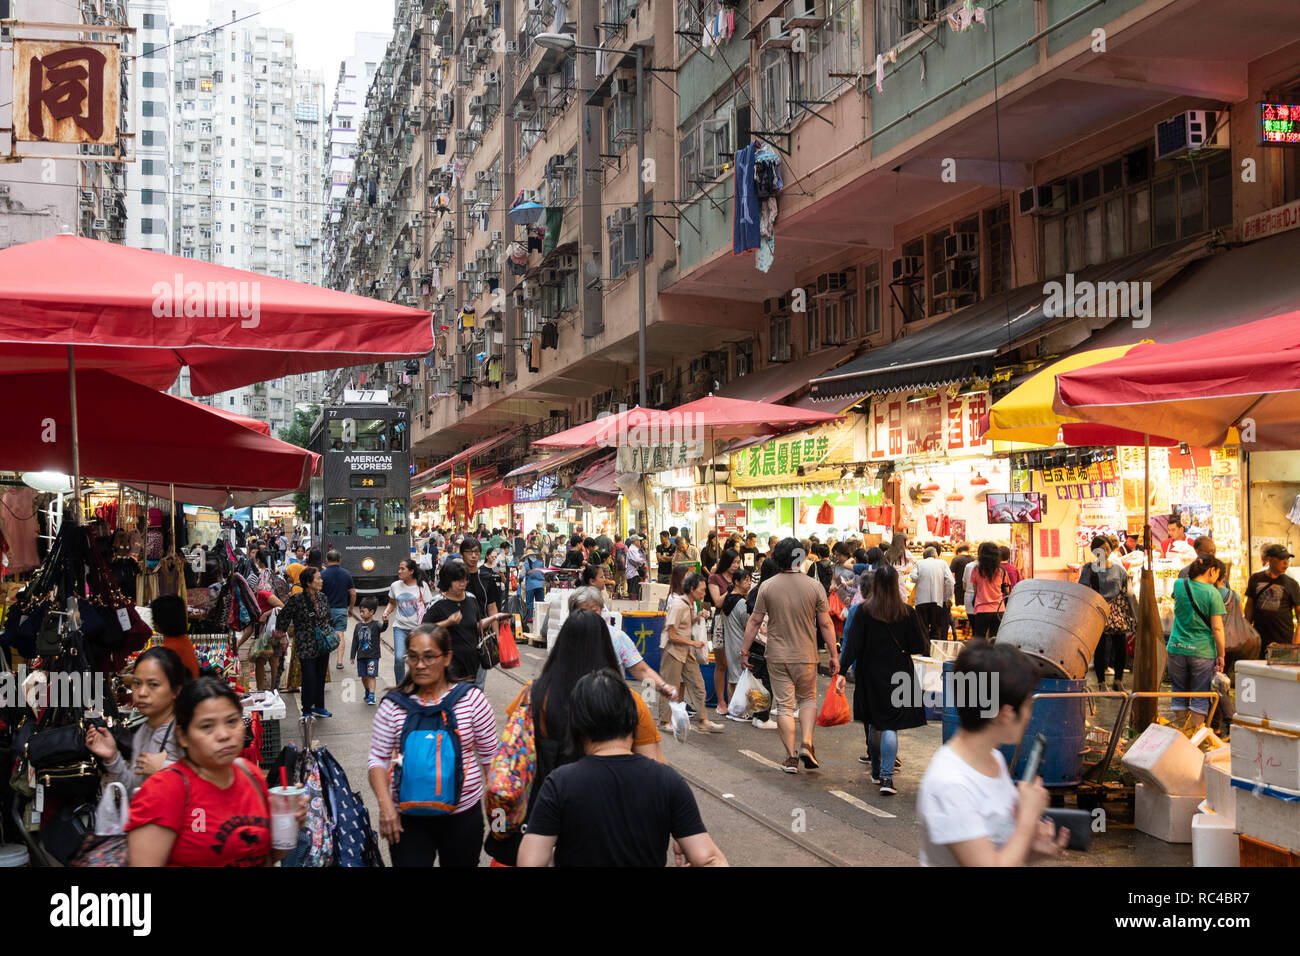 Hong Kong, China - October 13 2018: A large crowd walk in the Chun Yeung Street market in North Point in Hong Kong island with a tramway car going thr Stock Photo